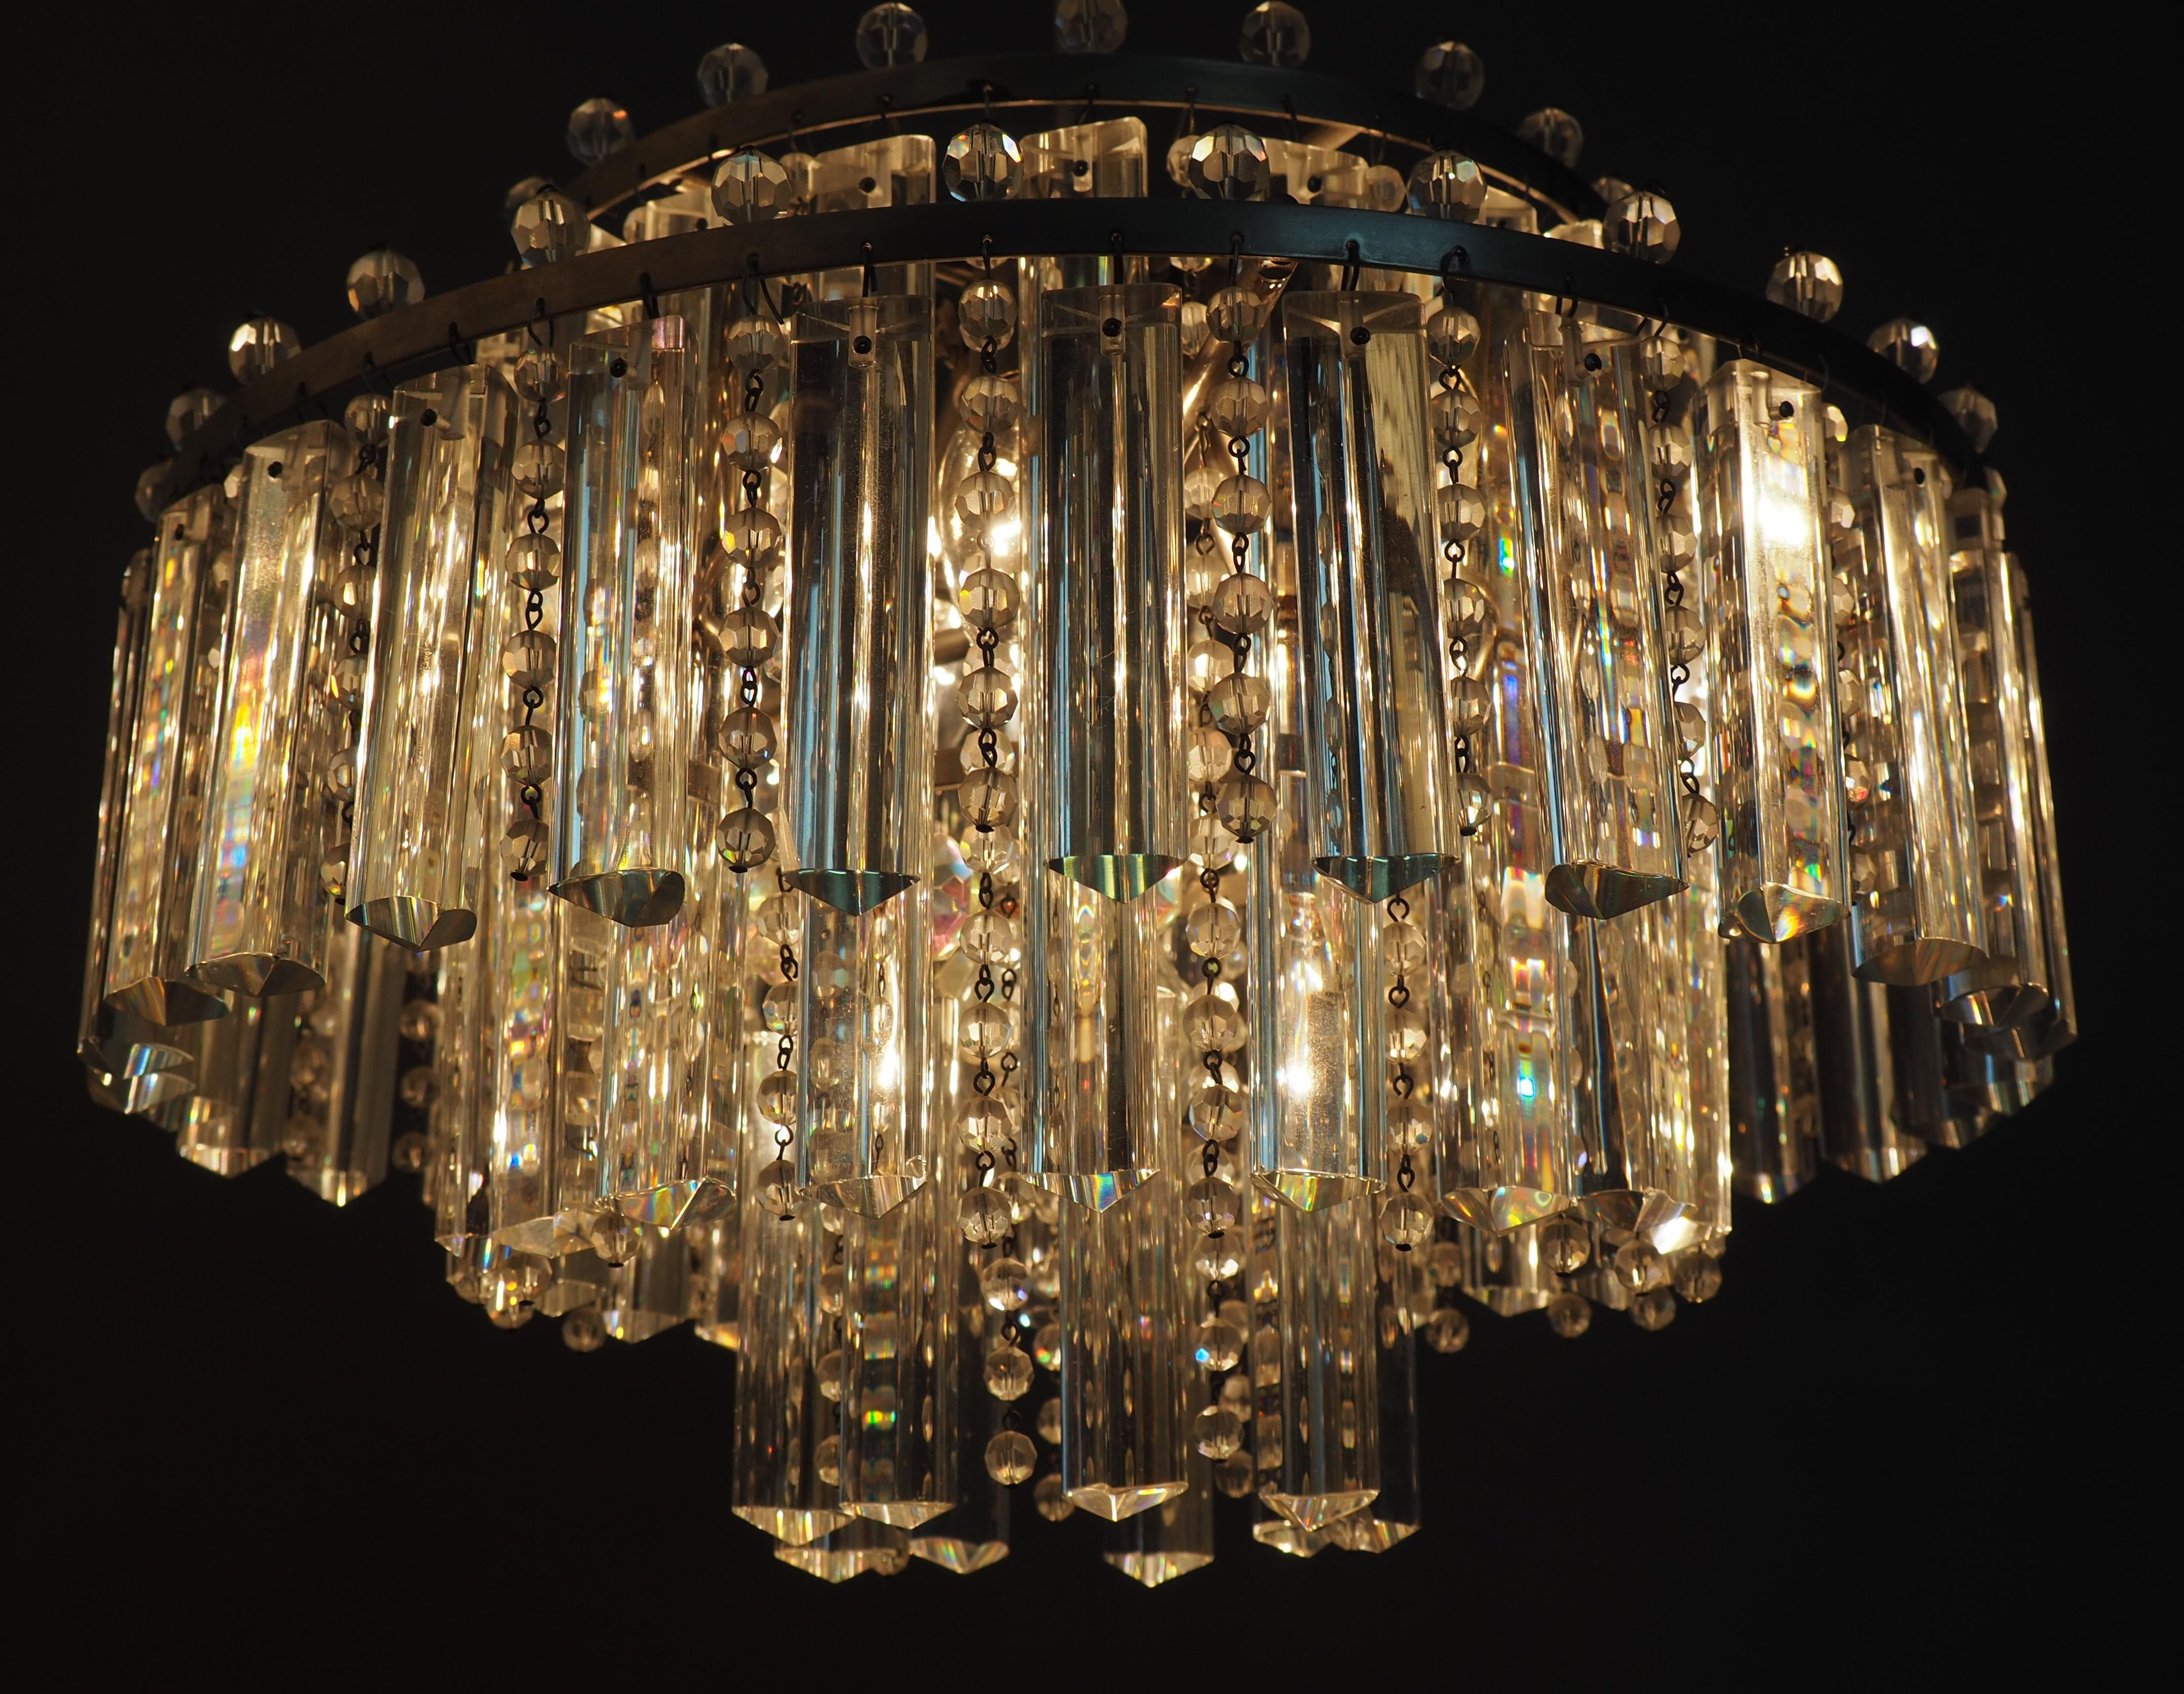 Stunning Set of Haevy Cut Glass and Nickel Chandeliers by Palwa, circa 1960s For Sale 10